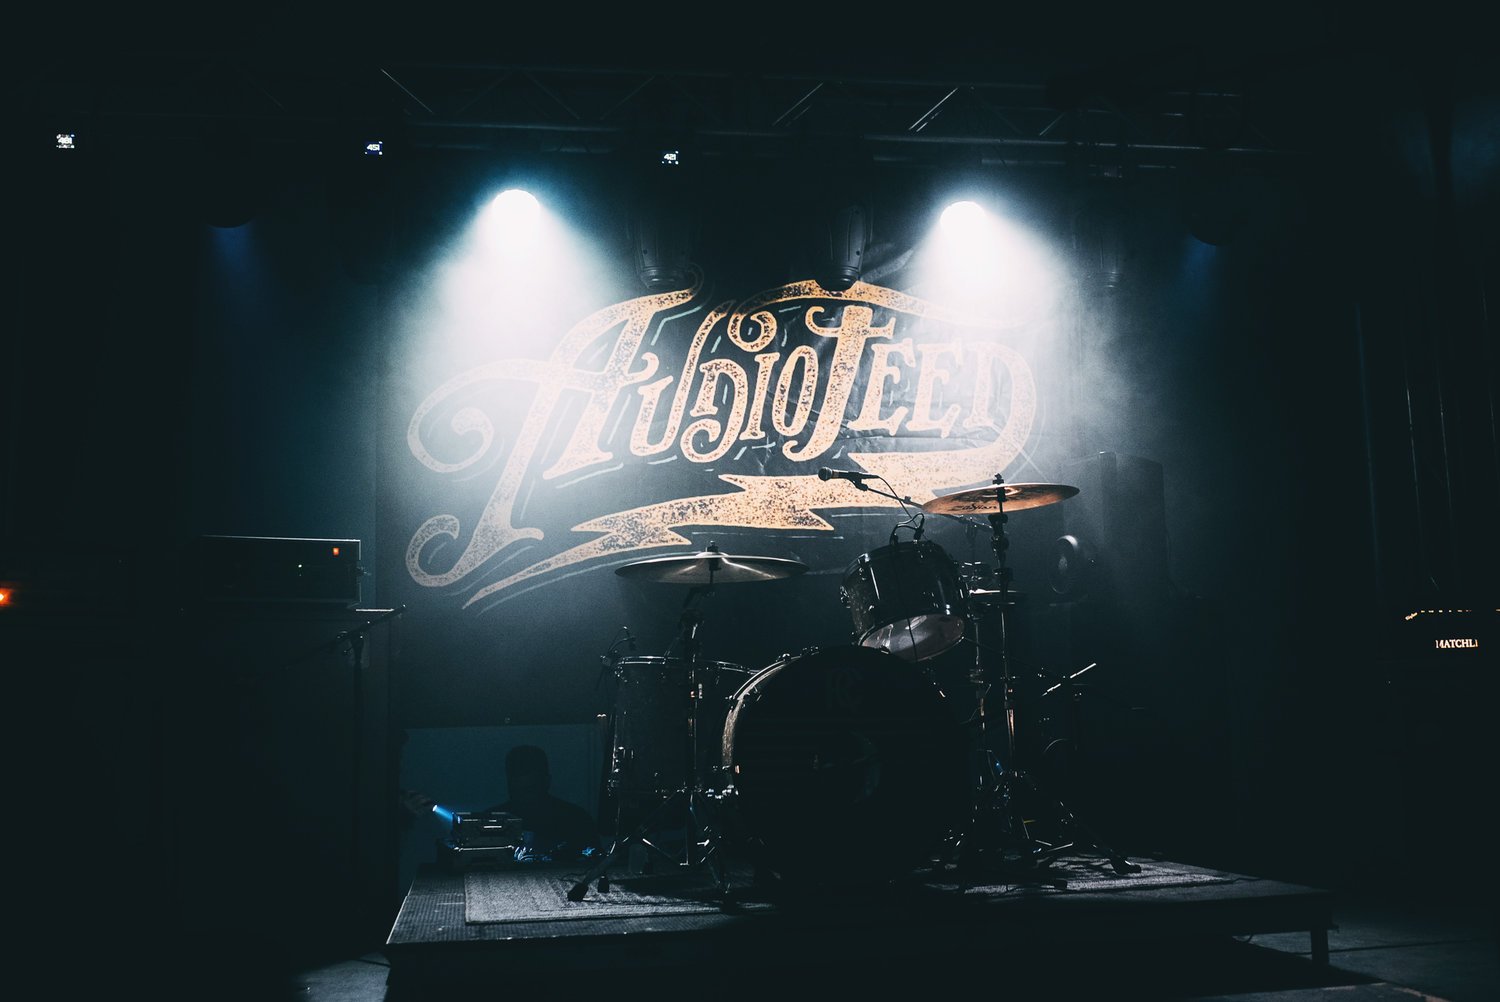 Photo of a drum set on a dimly lit stage with a banner that reads "Audiofeed" in the background.